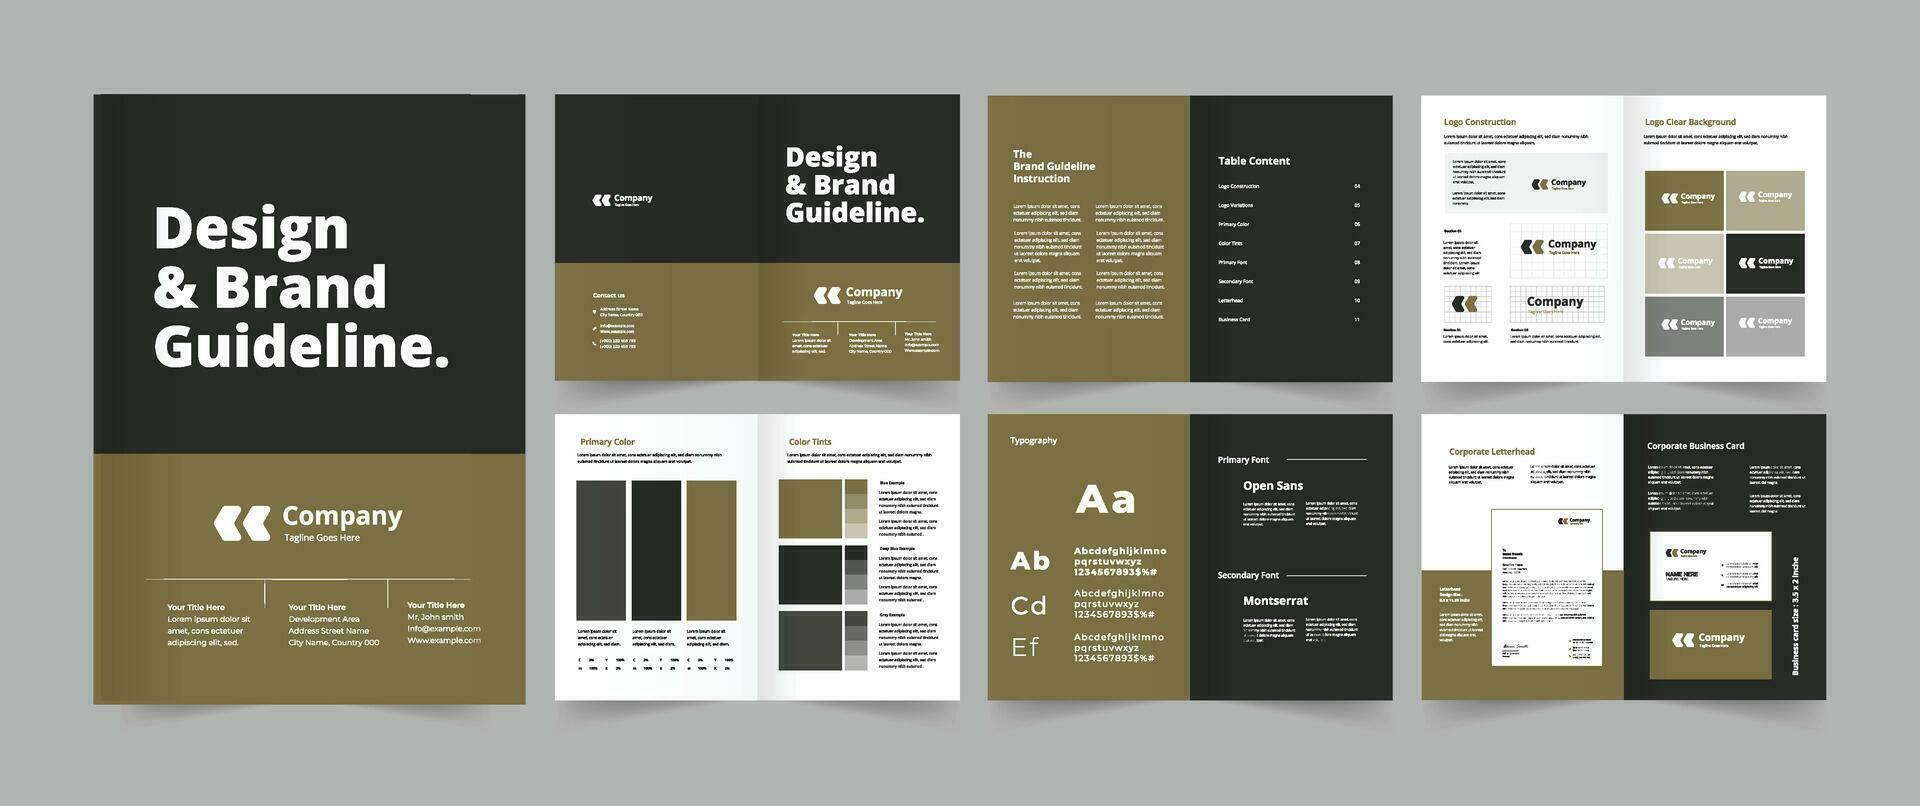 Brand Guideline brand guide template vector